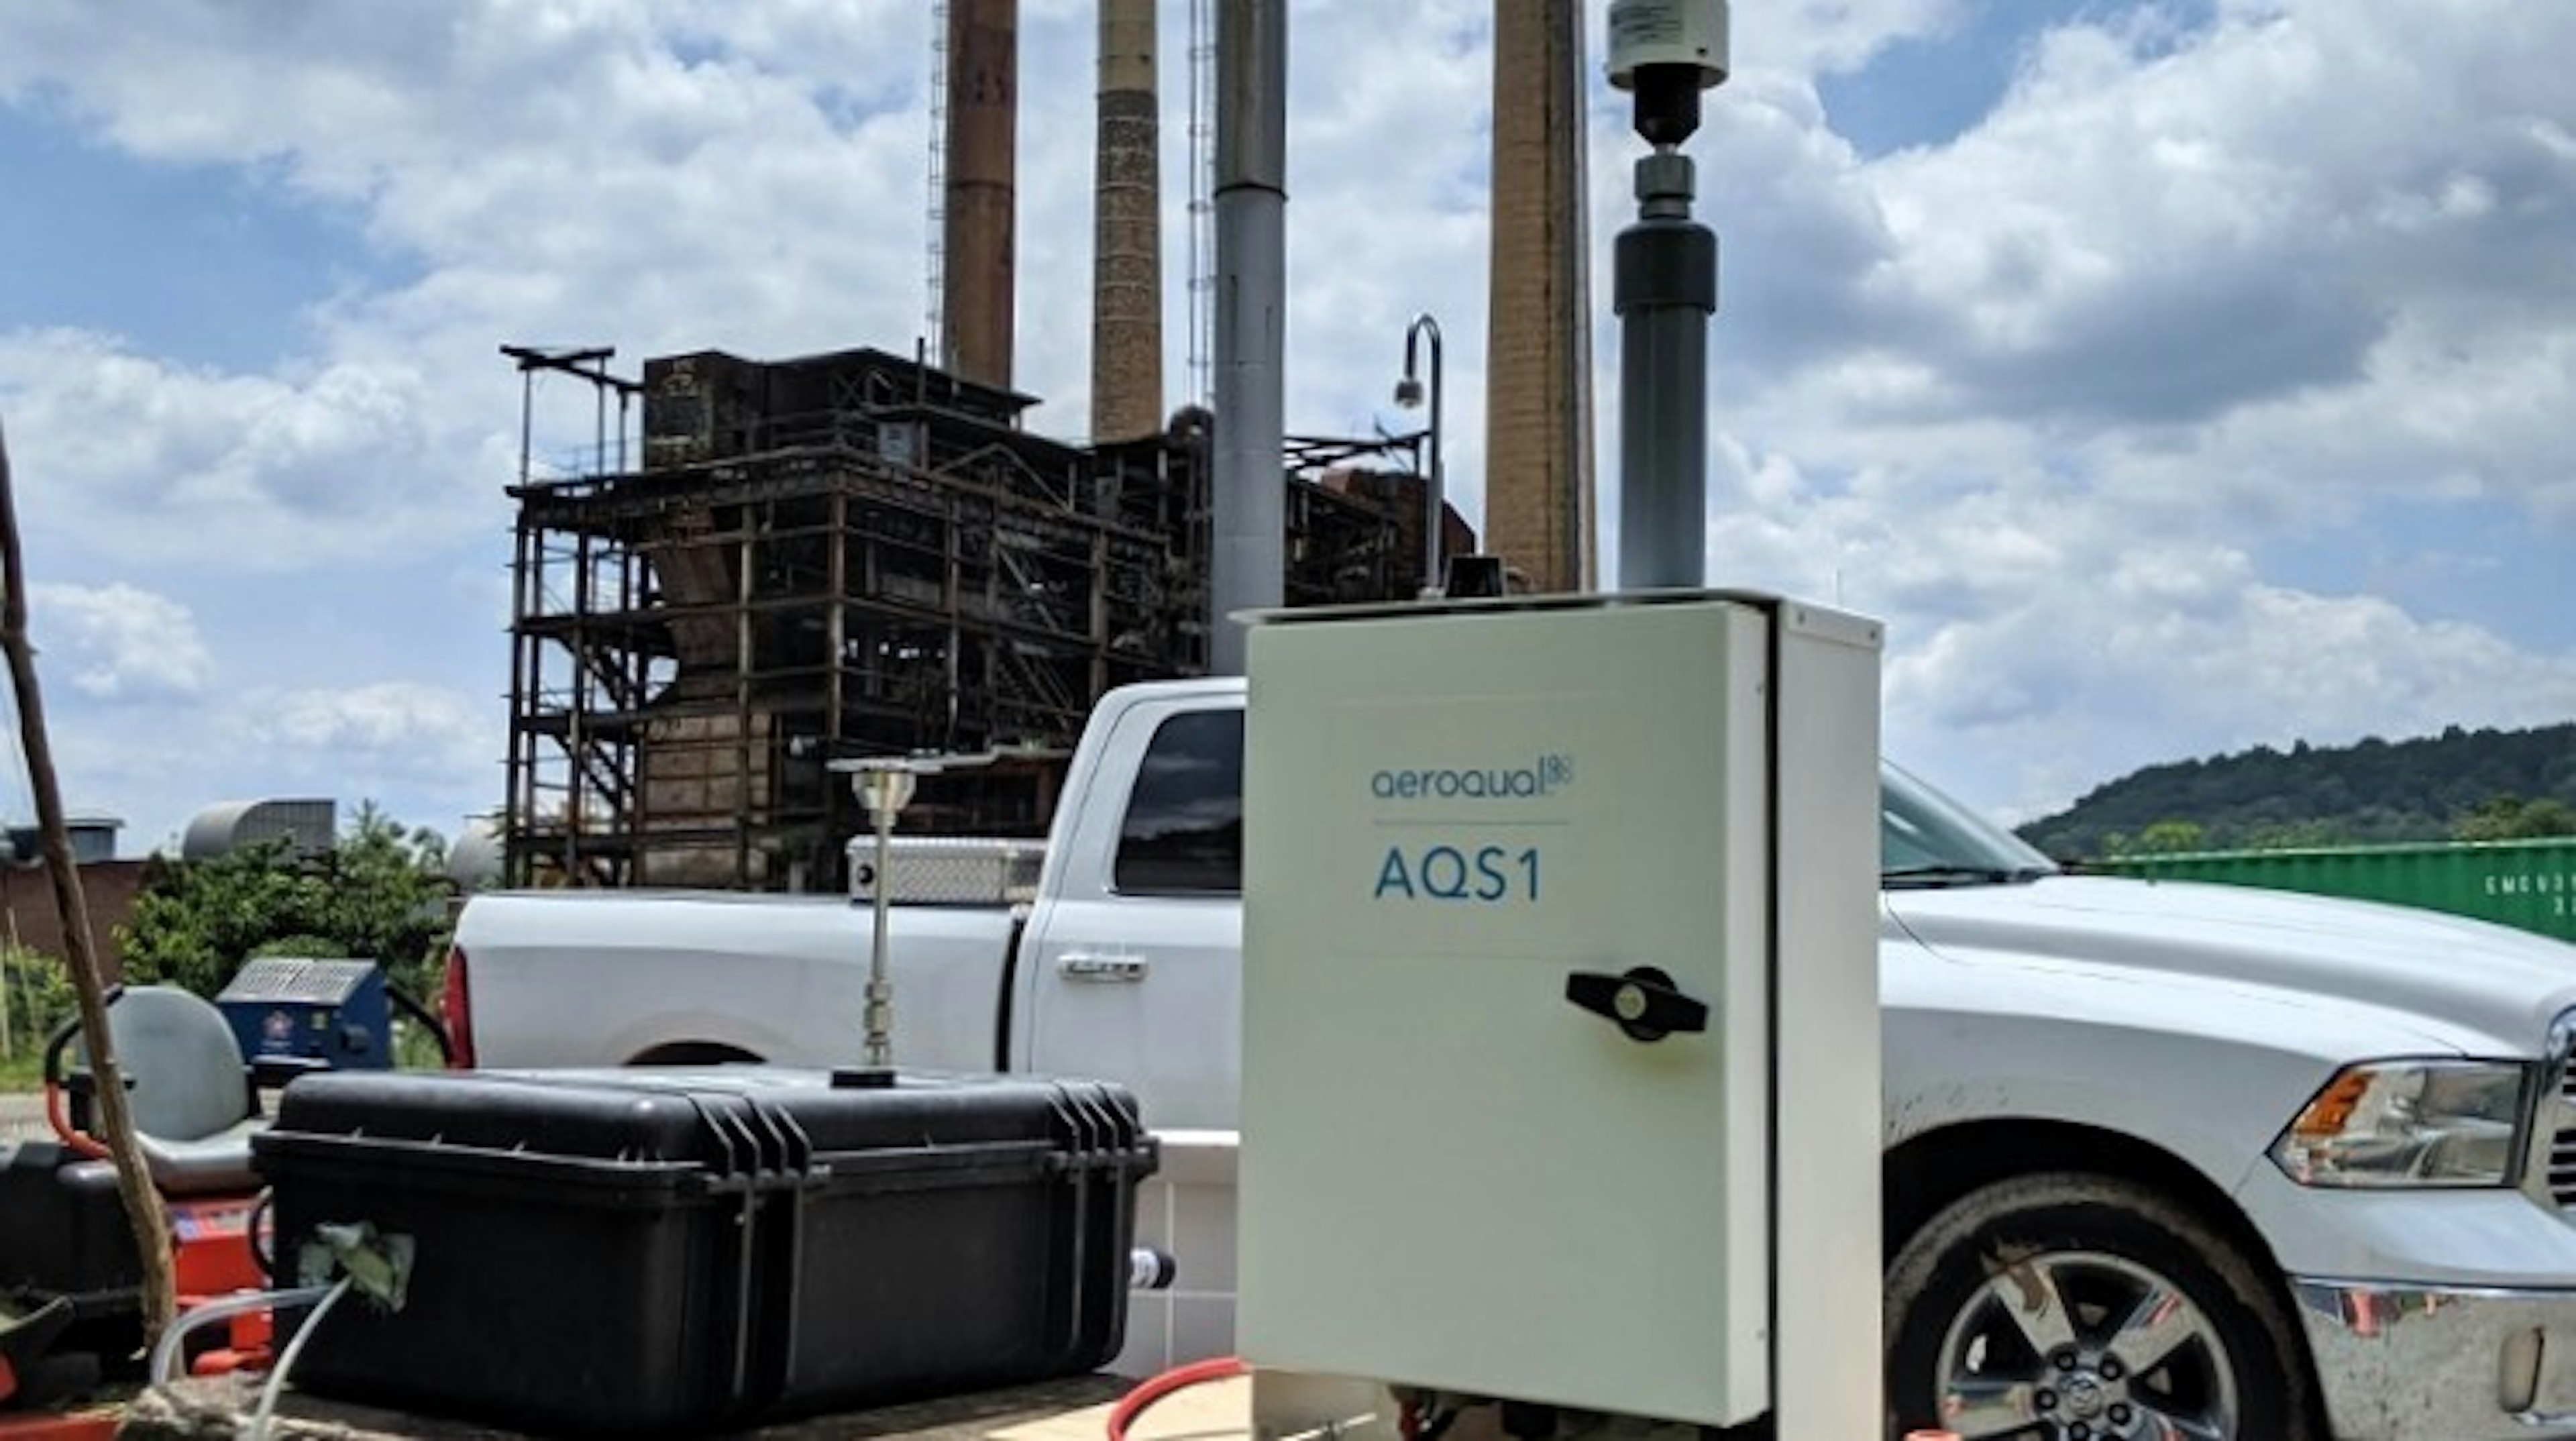 Two Aeroqual AQS monitors with Cloud software were used for real-time monitoring and alerts.